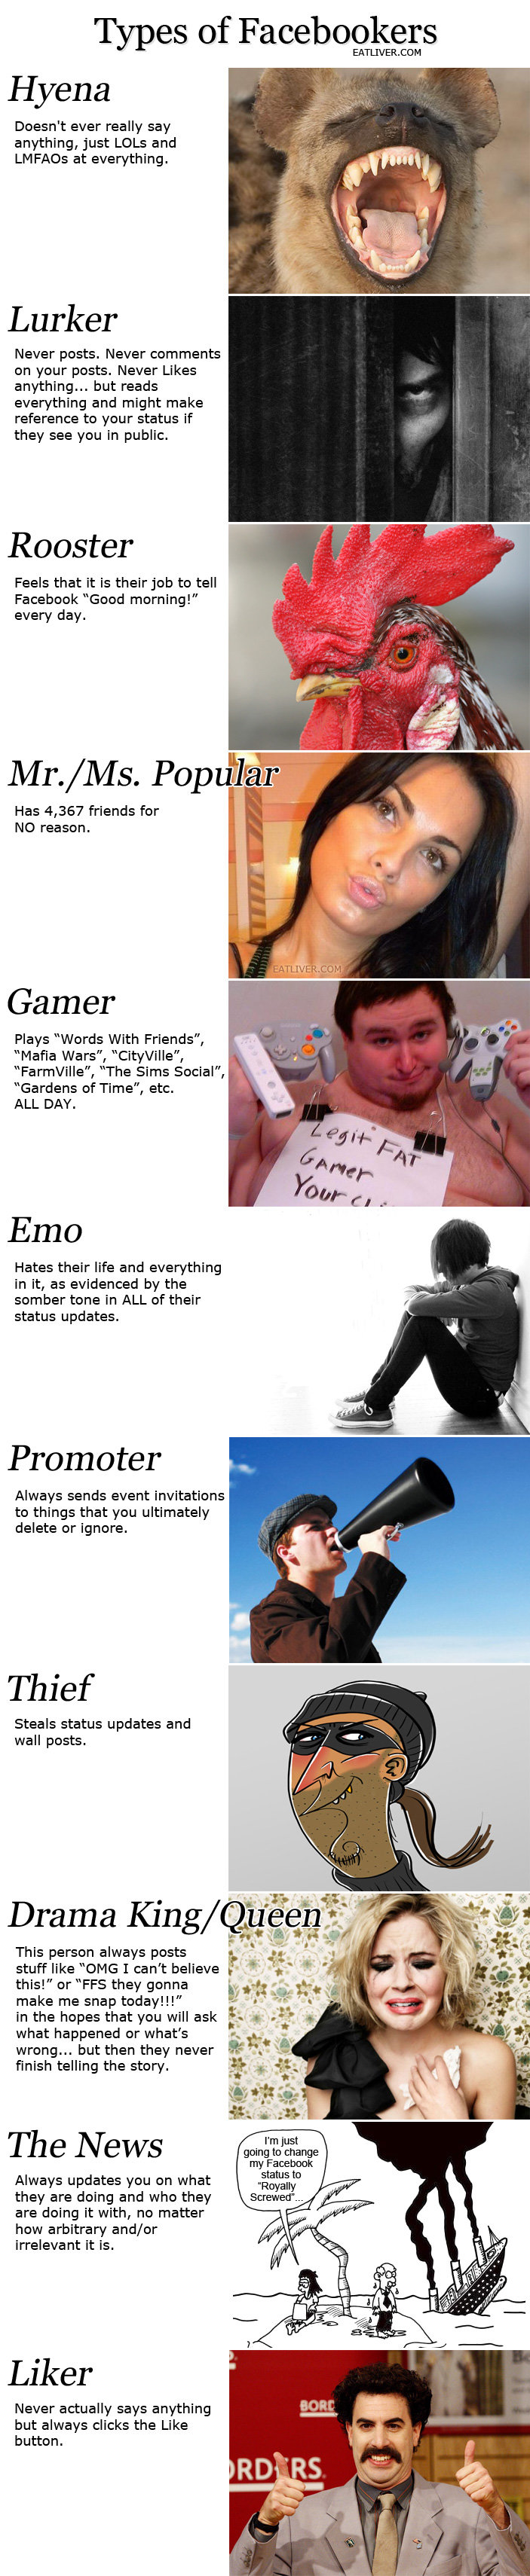 Types of facebookers. props to eatliver.com not mine I like new friends sub. Types of Facebookers EATLIVER. COM Hyena Doesn' t ever really say anything, Just LO